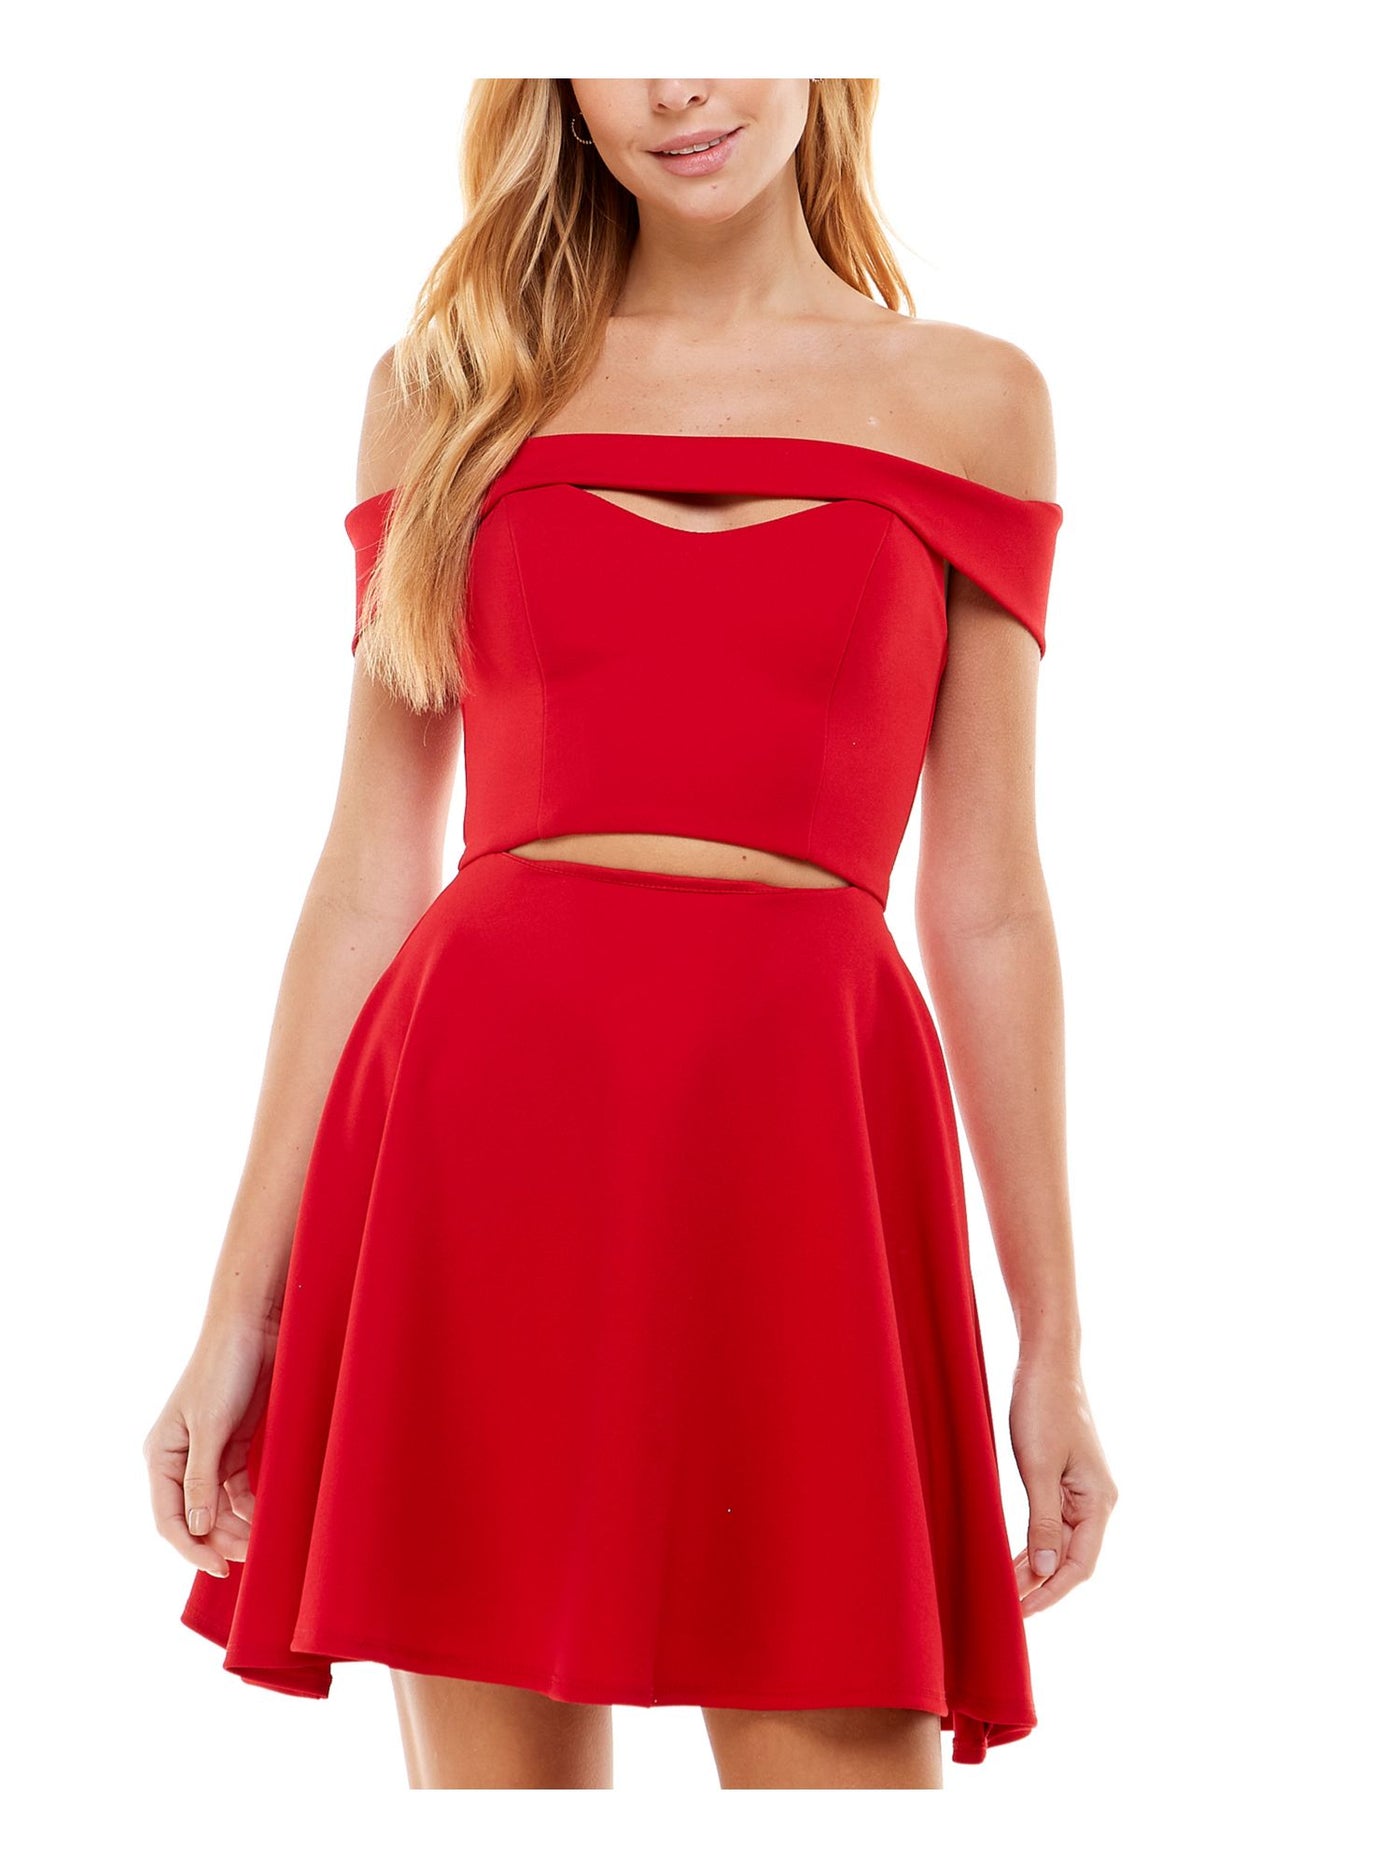 CITY STUDIO Womens Stretch Cut Out Zippered Lined Cap Sleeve Off Shoulder Short Cocktail Fit + Flare Dress